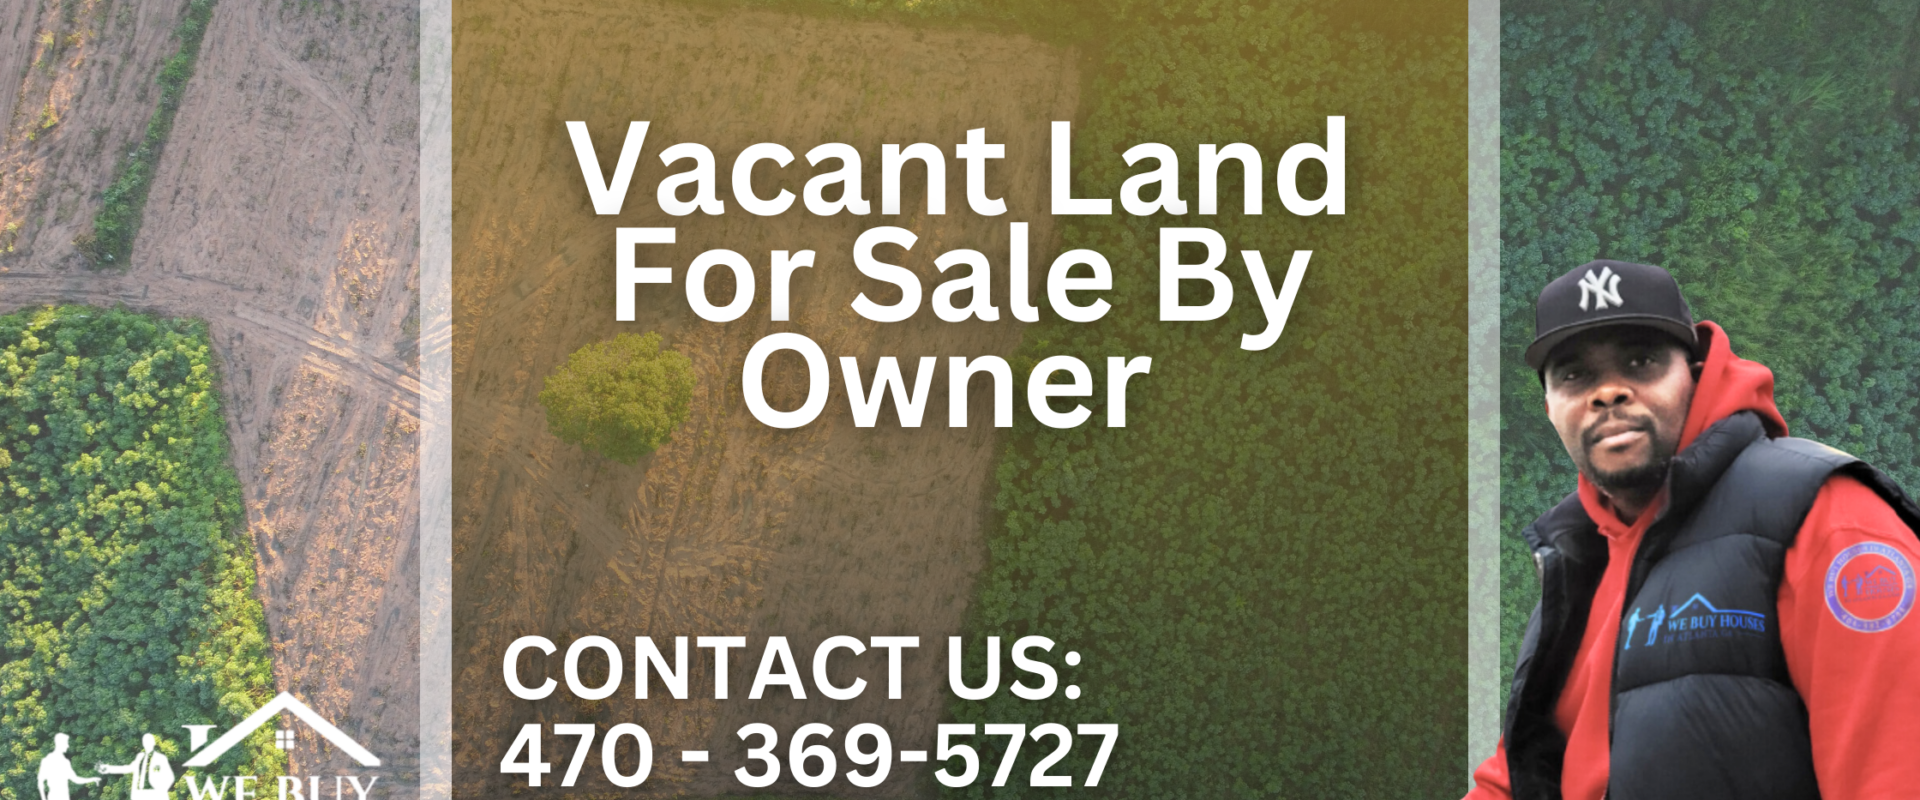 Vacant Land For Sale By Owner